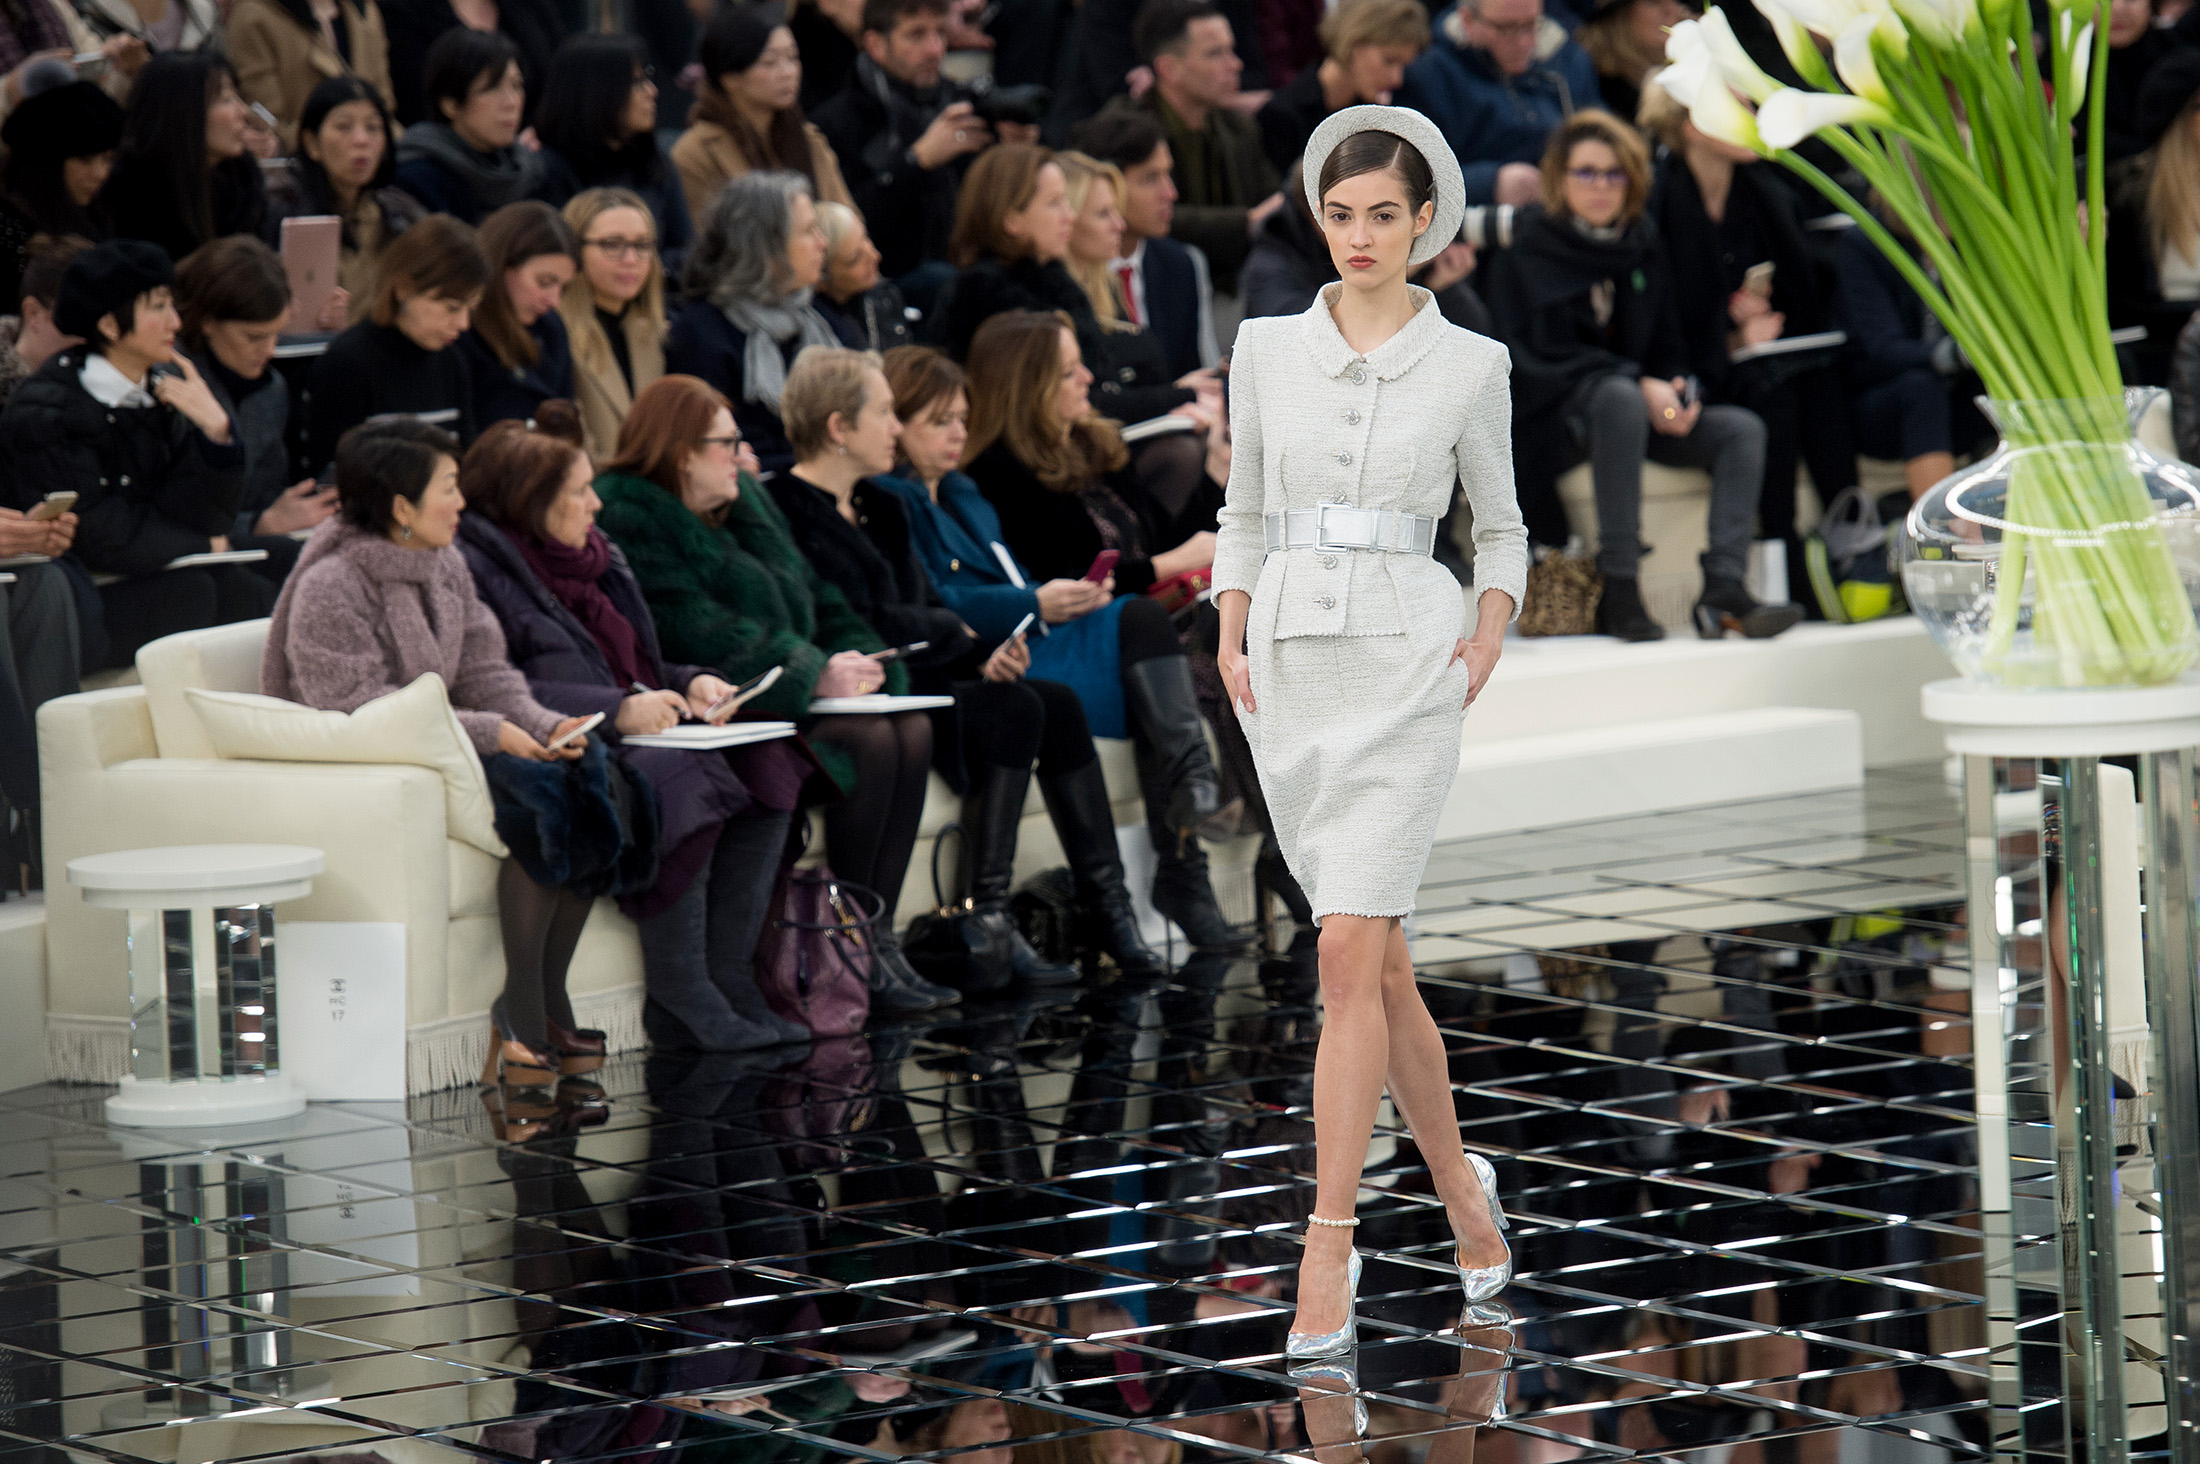 Chanel Couture Spring 2017 Serves Up Power Women